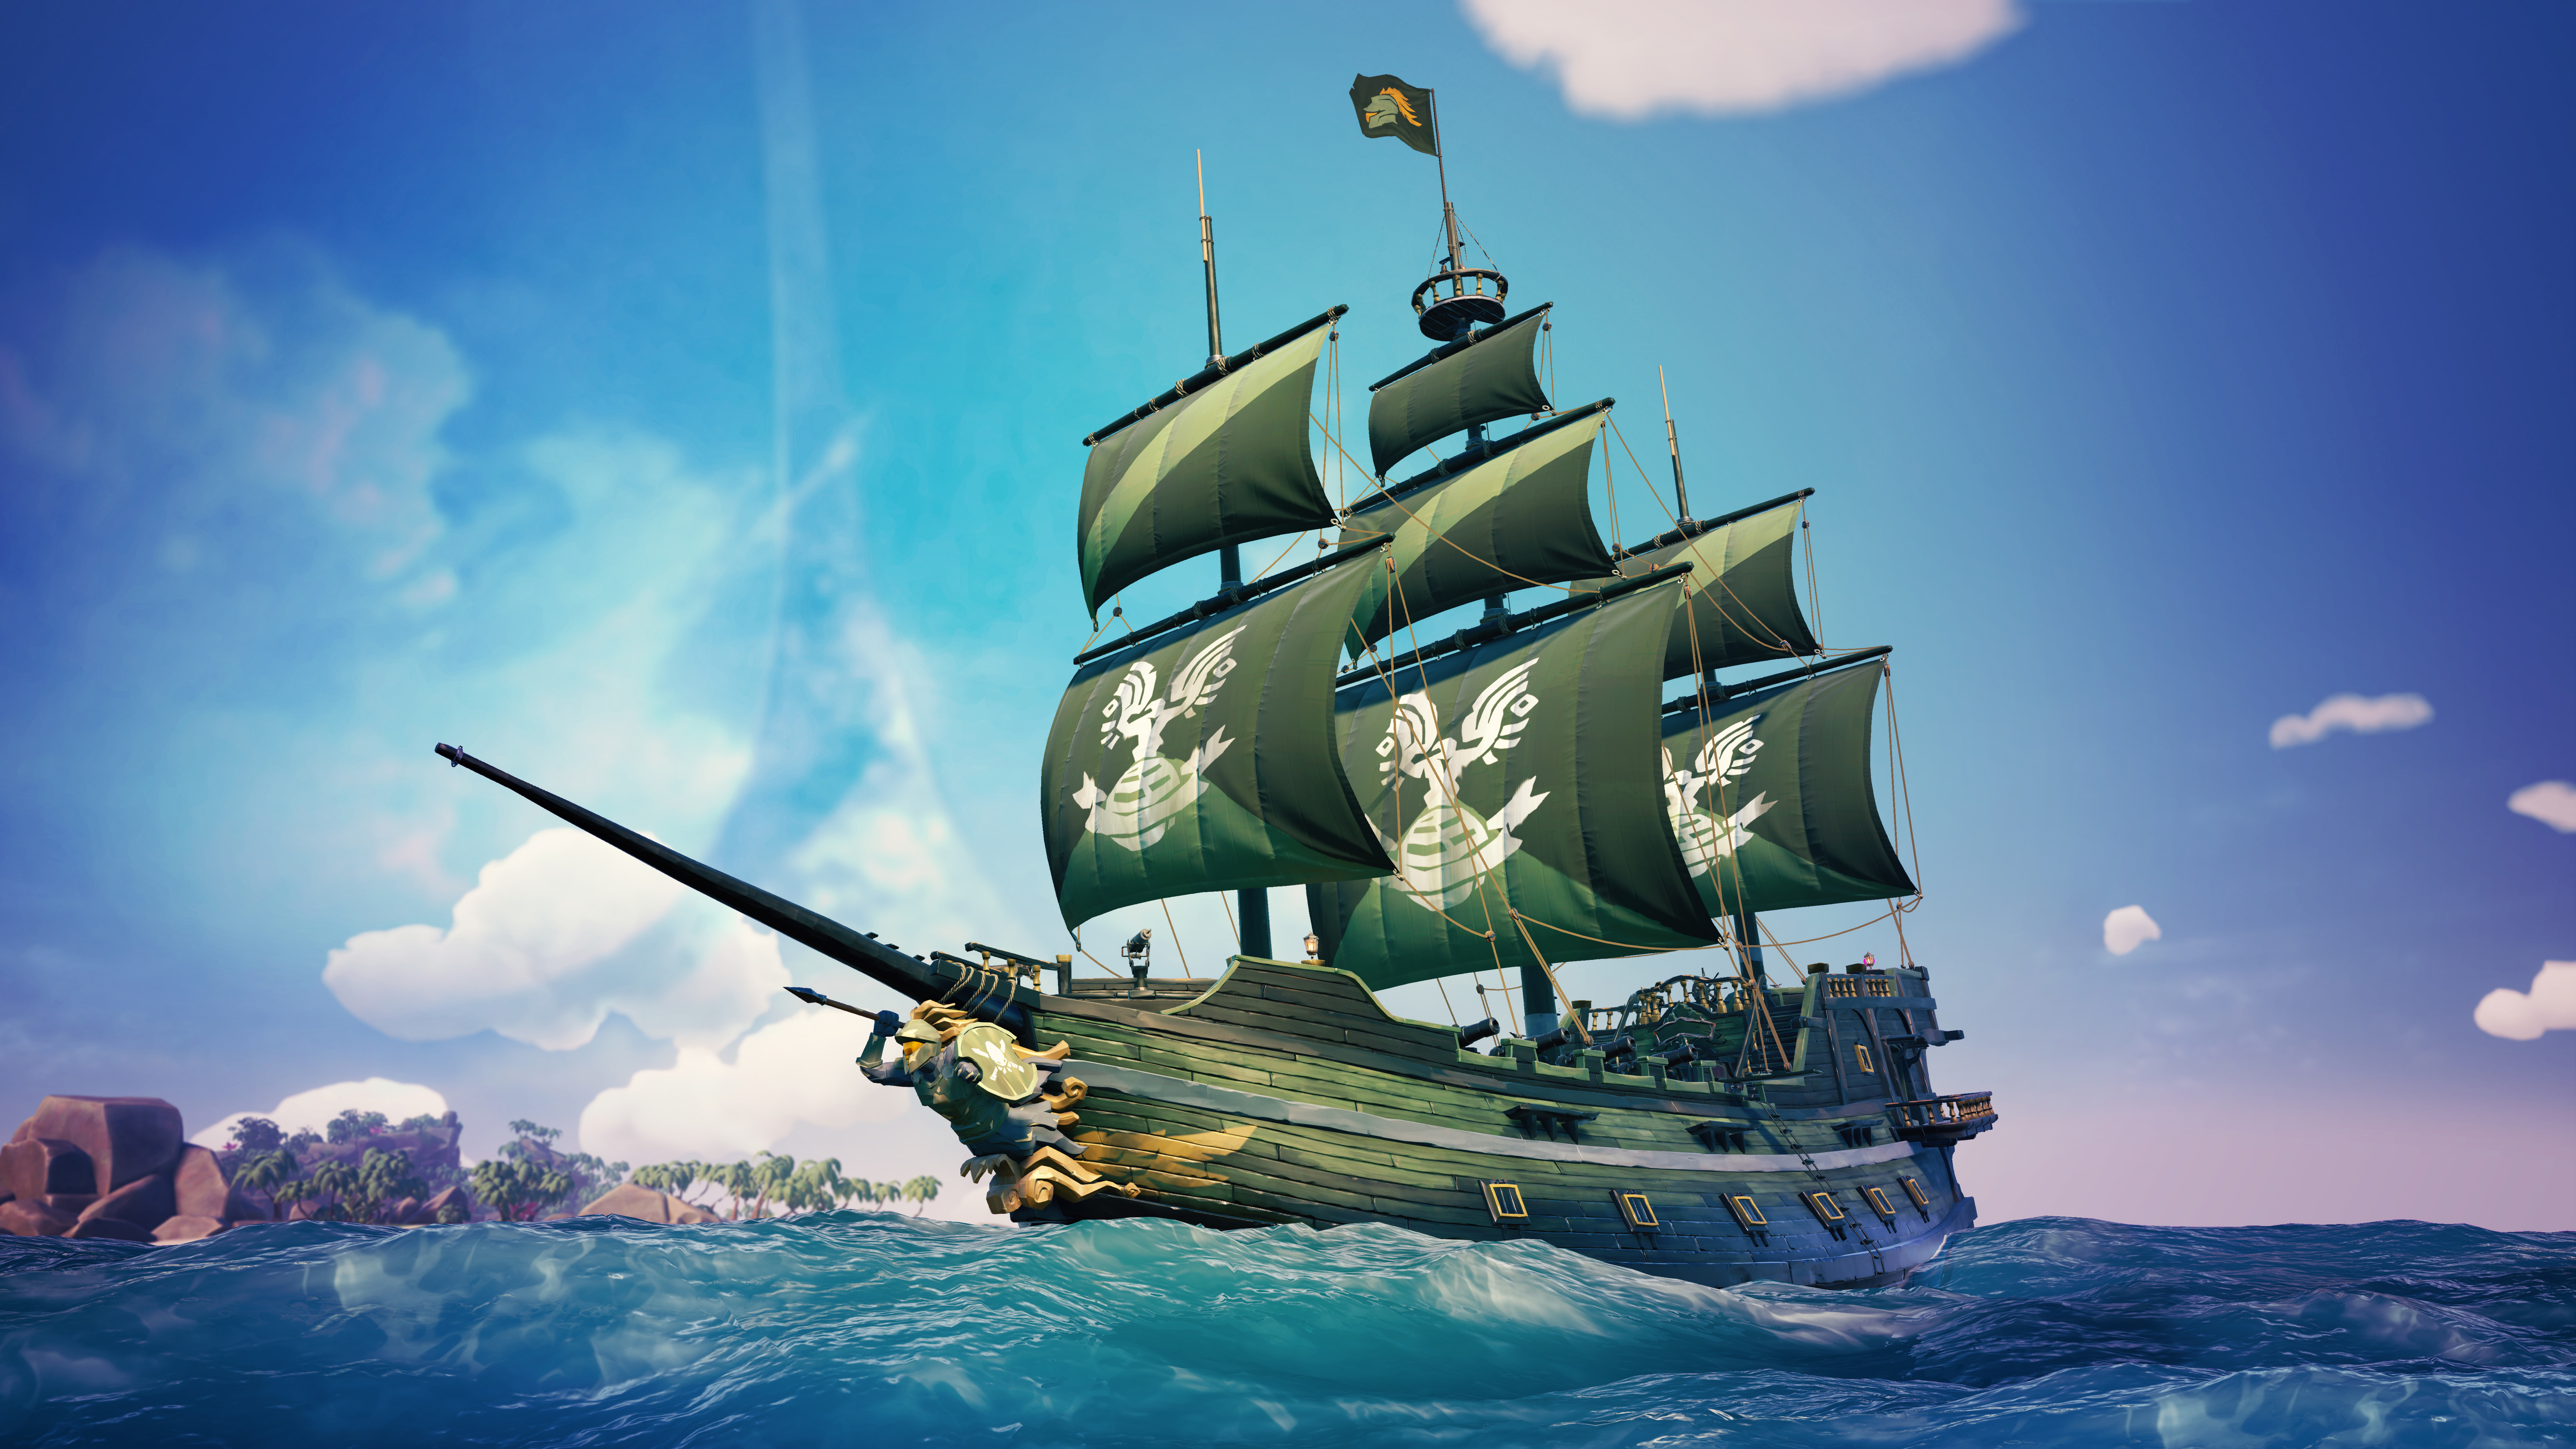 HD wallpaper Video Game Sea Of Thieves  Wallpaper Flare